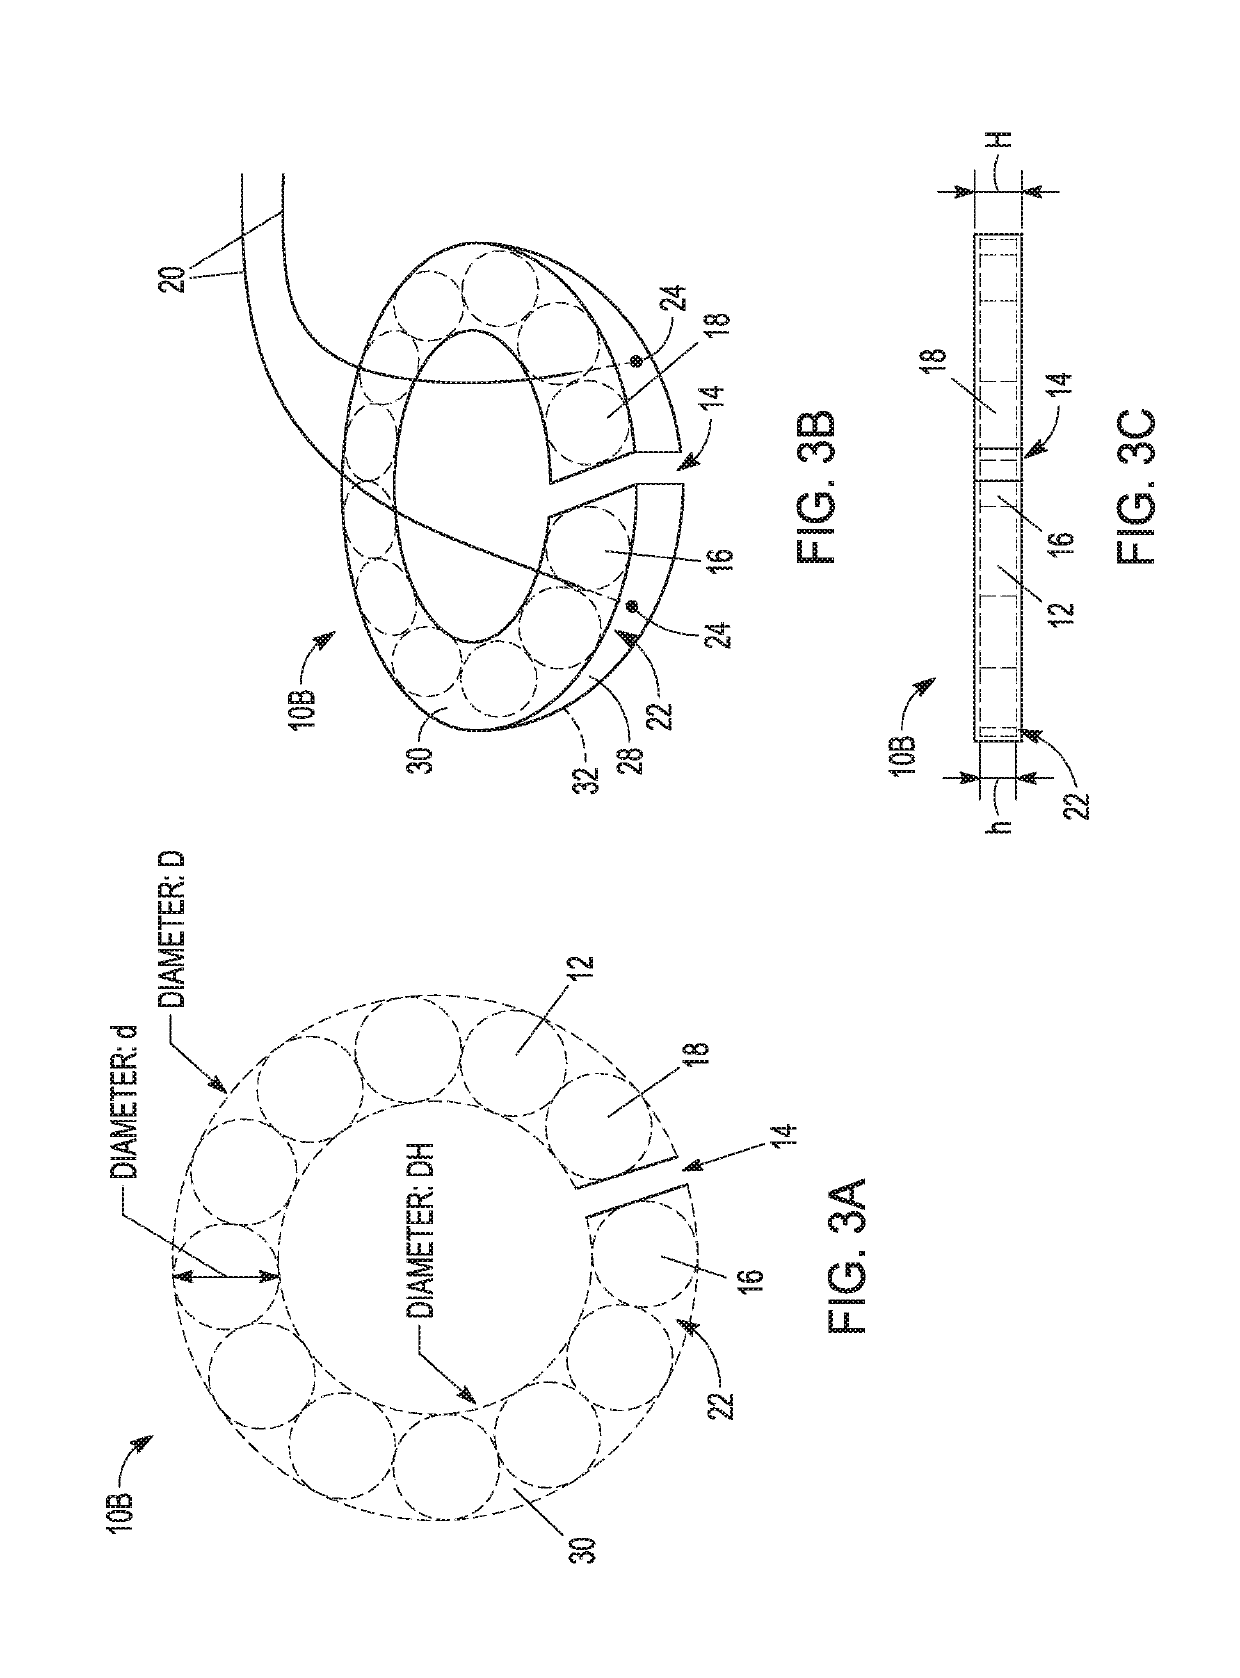 Magnetic anastomosis devices